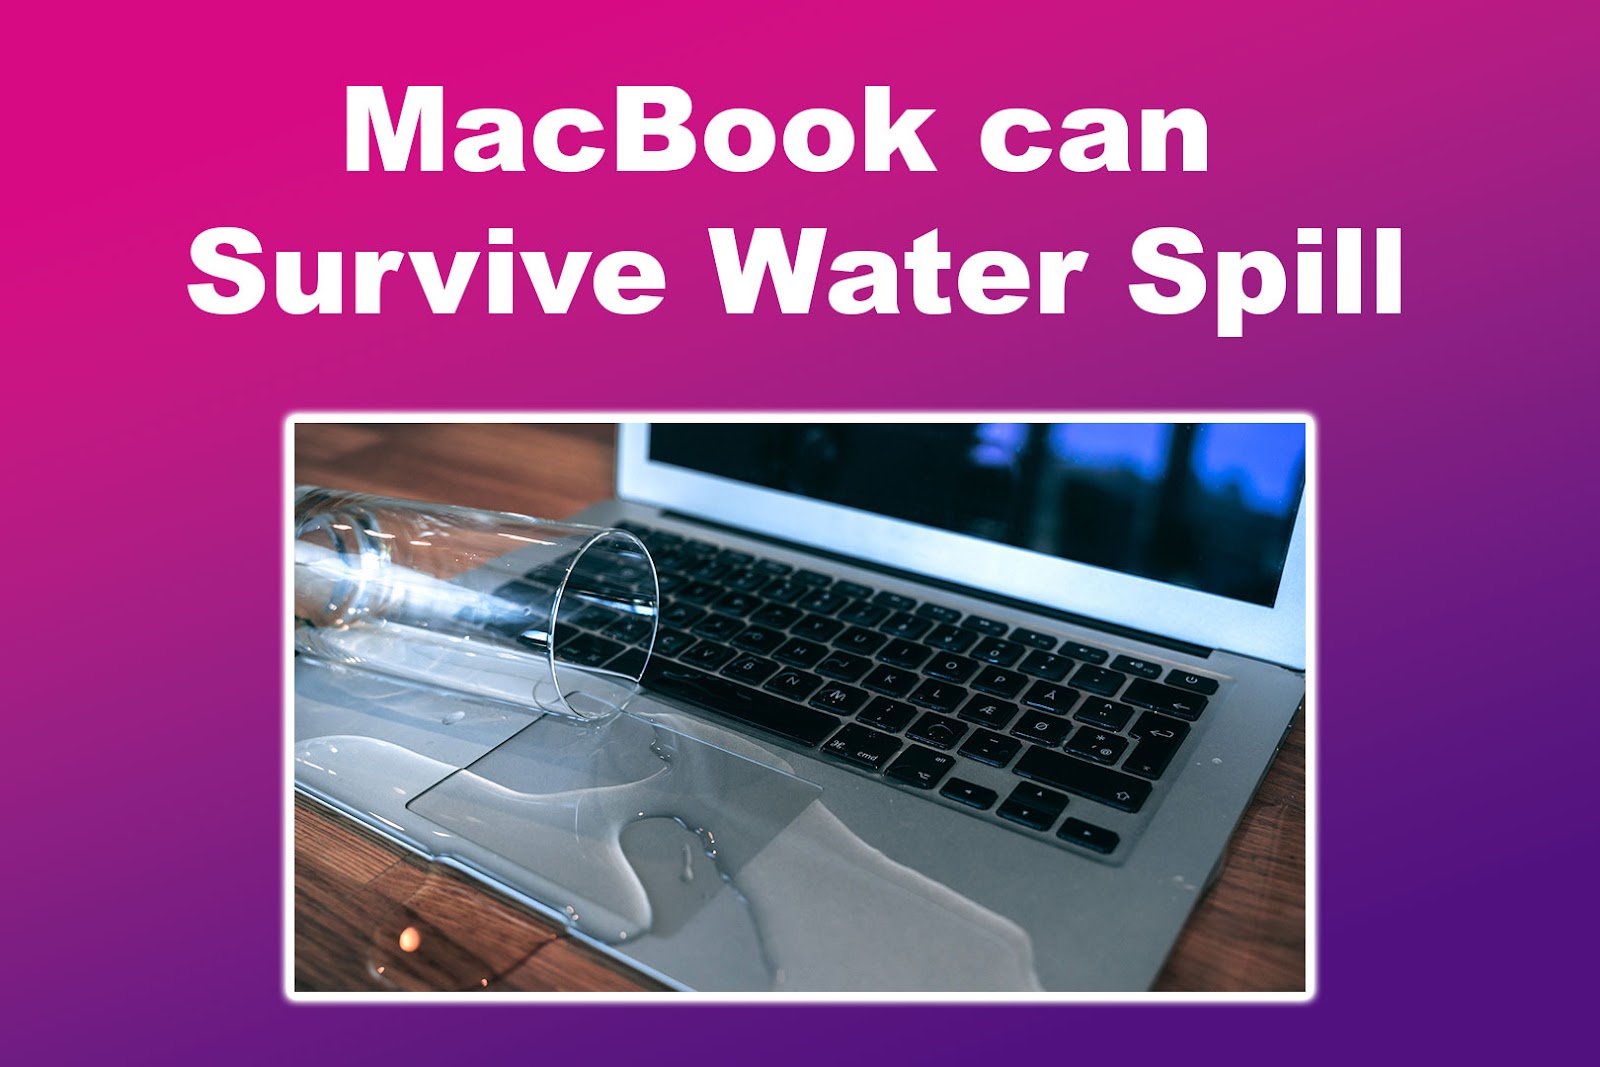 Can A MacBook Survive Water Spill